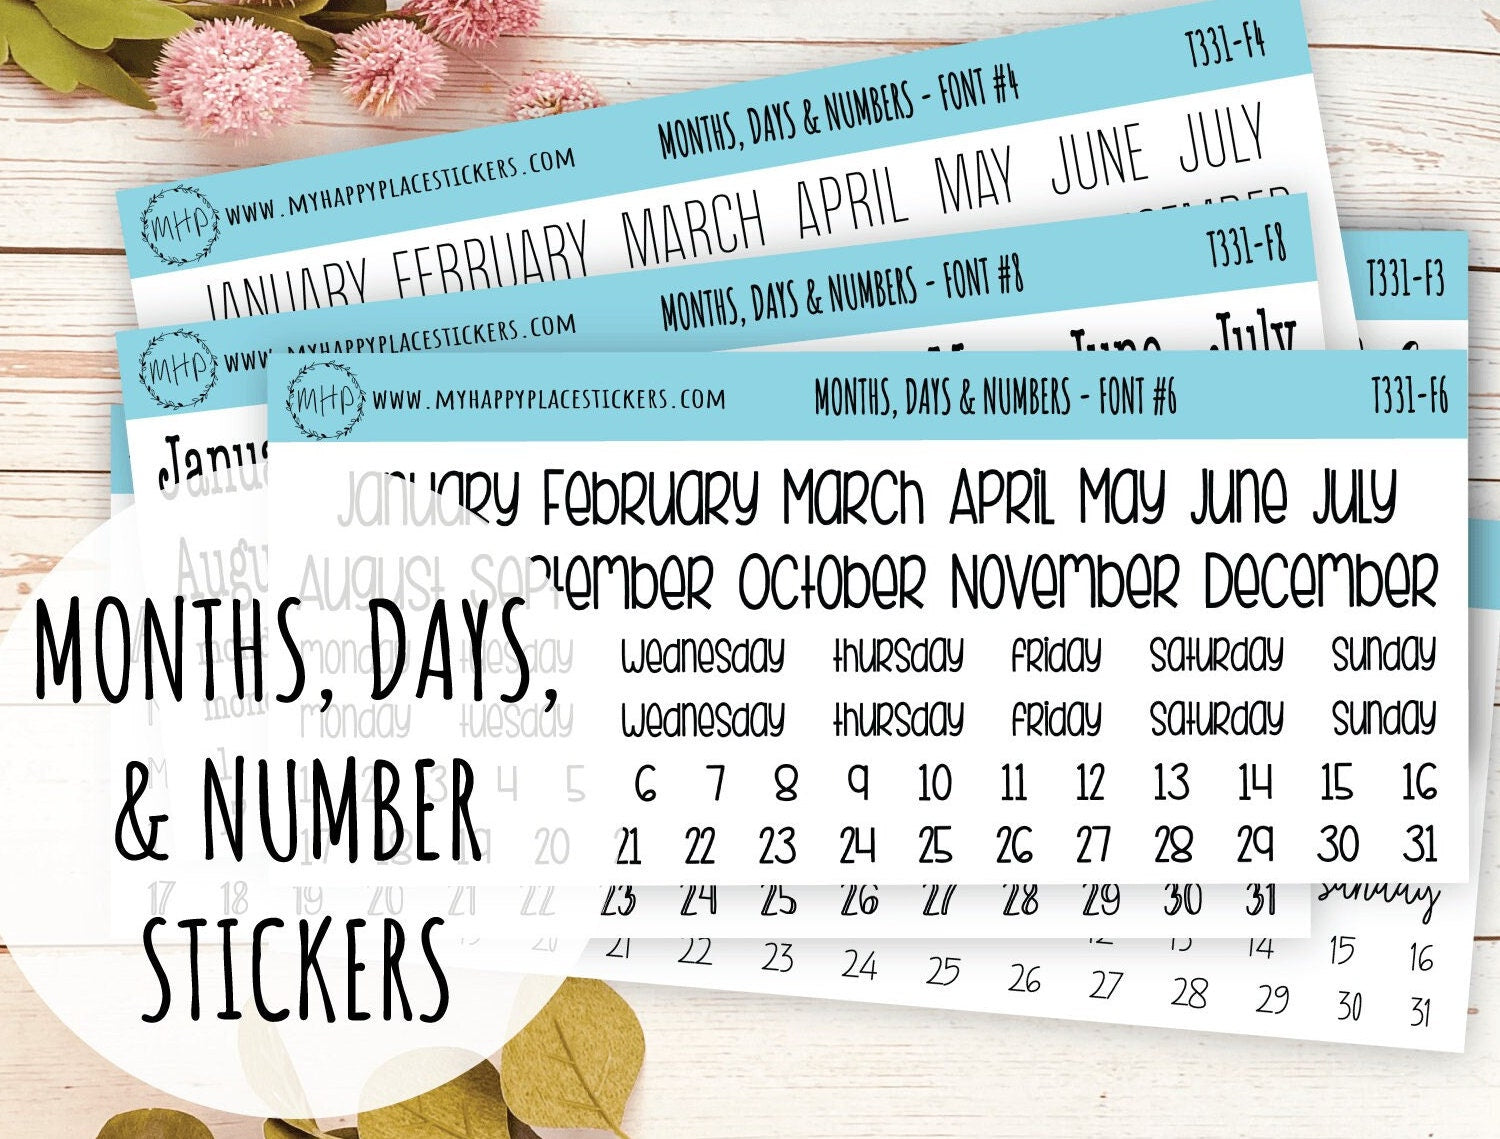 Small Date Number Stickers for Planners, Organizers and Bullet Journal